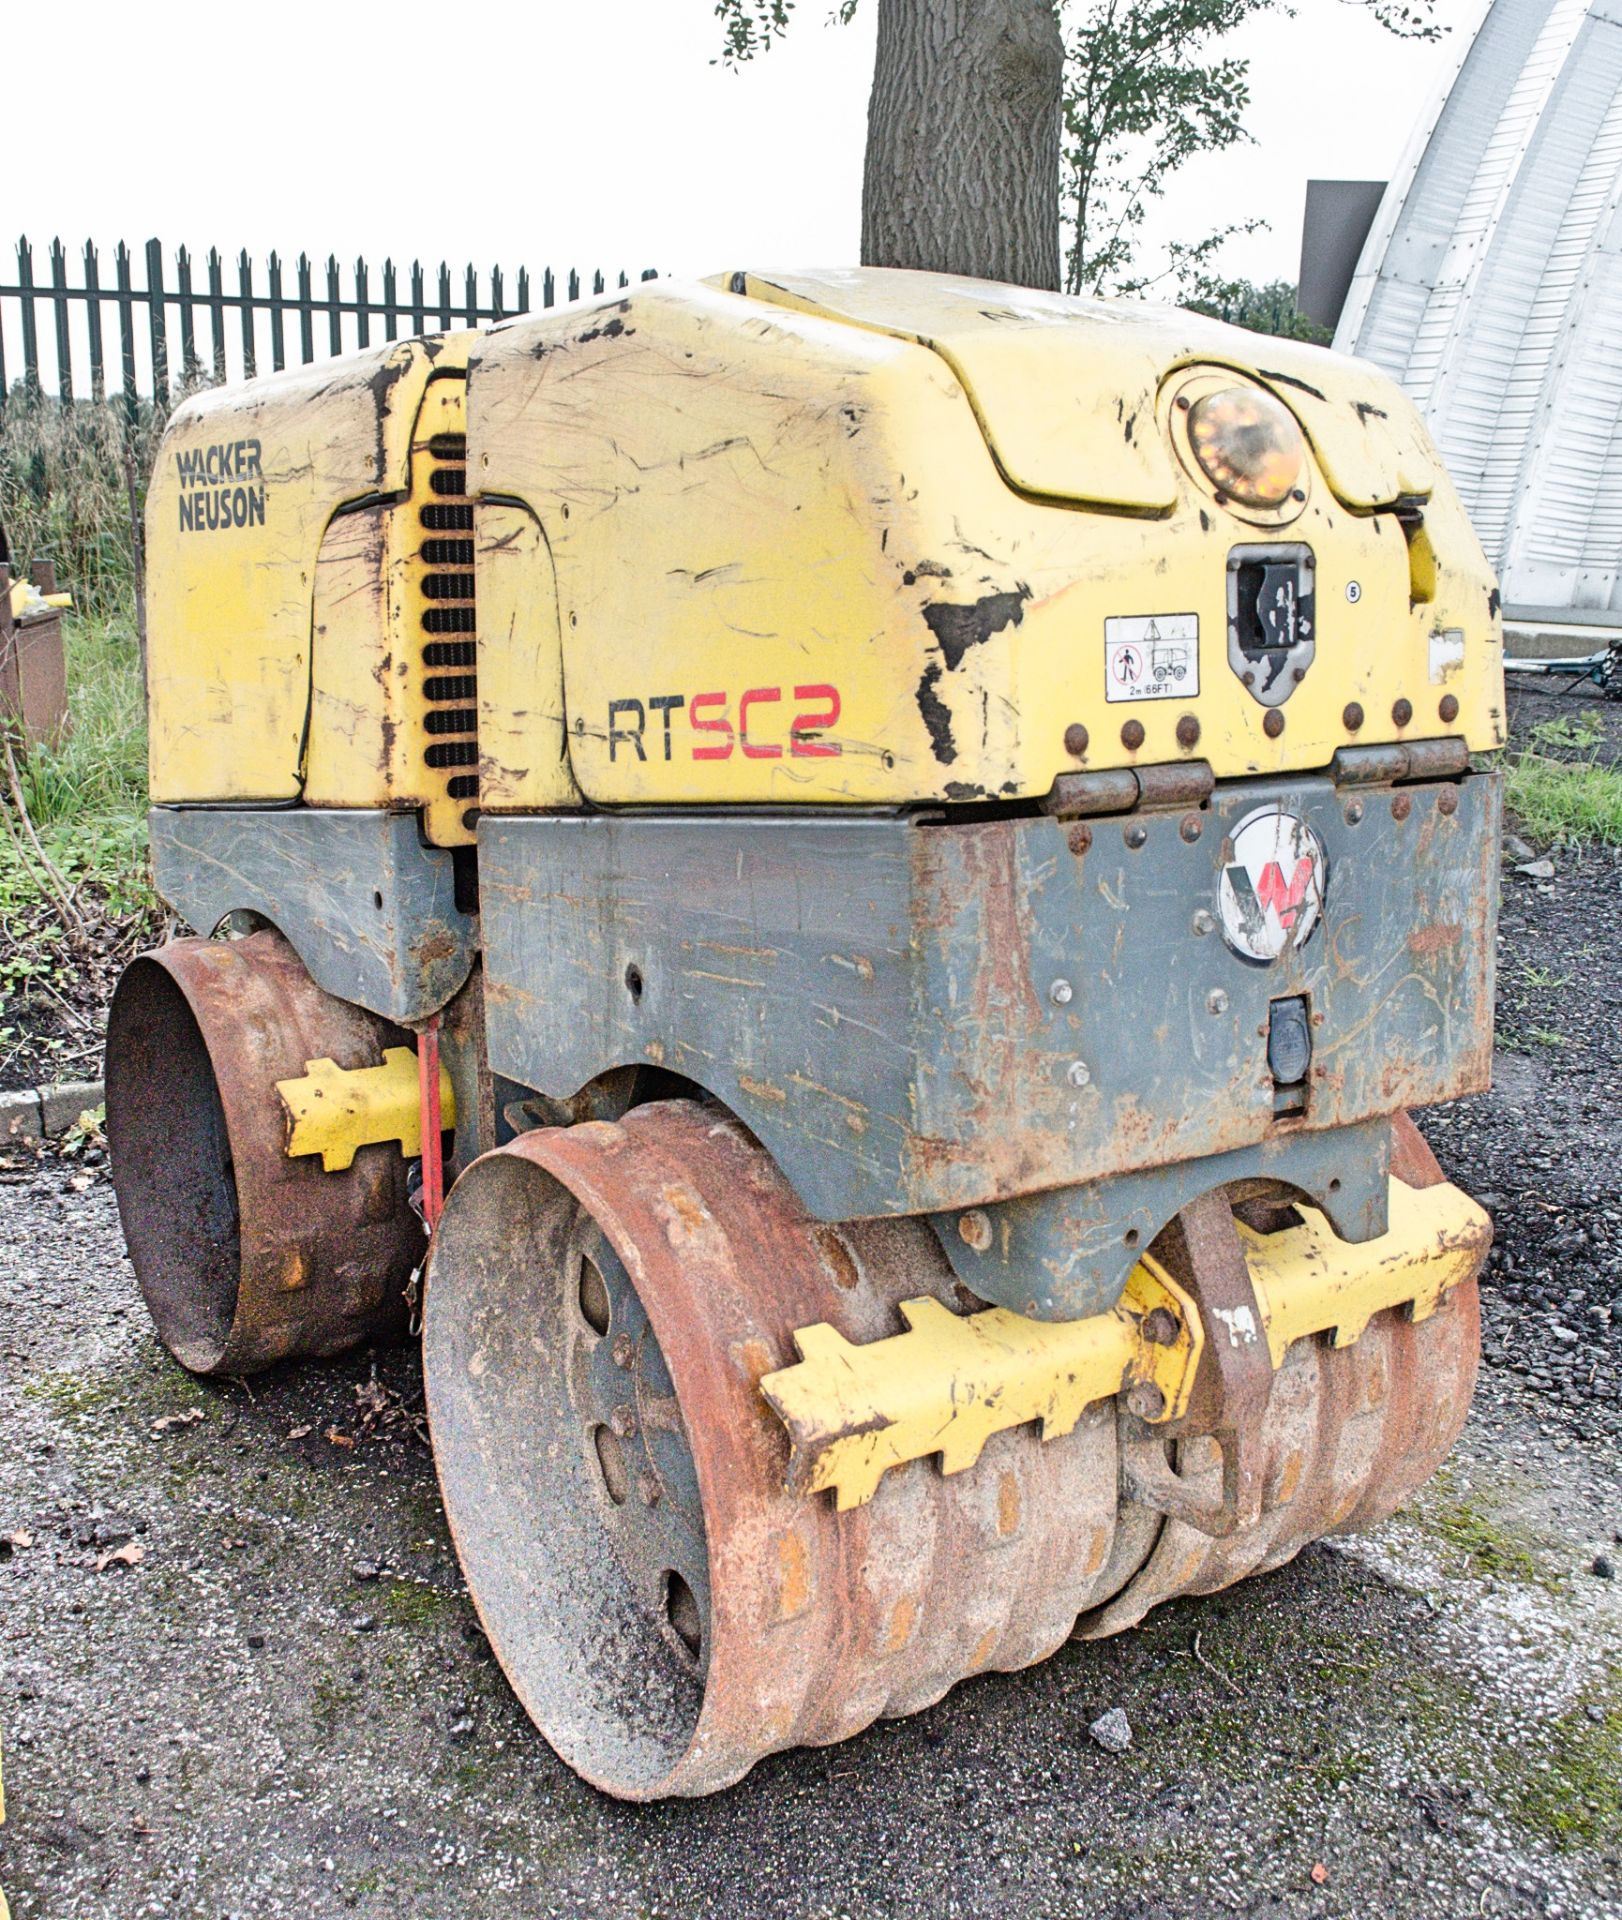 Wacker Neuson RTSC2 diesel driven trench roller Recorded Hours: 638 c/w remote control A605374